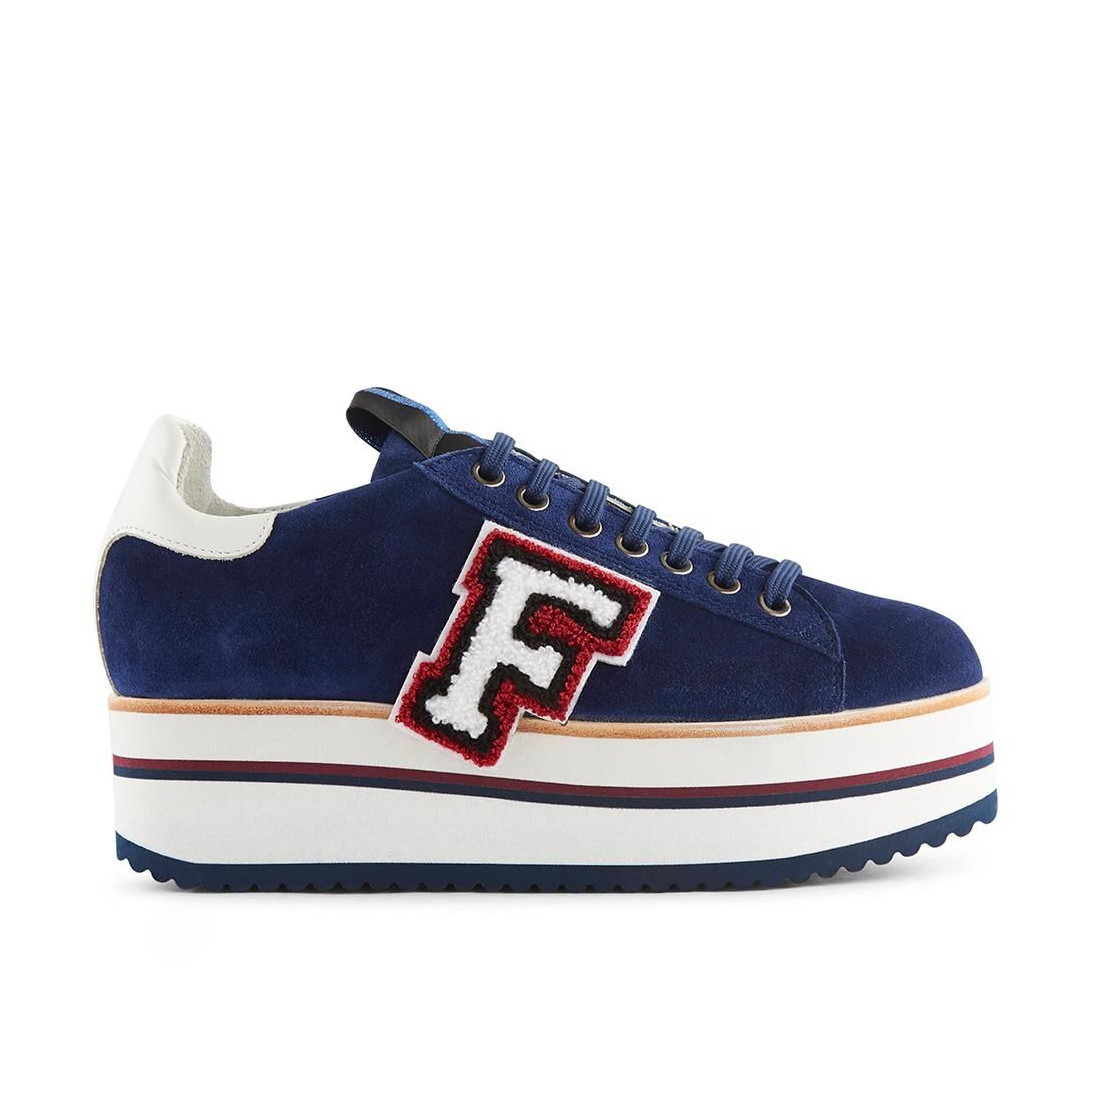 Fabi Sandy limited edition wedge sneakers in navy suede